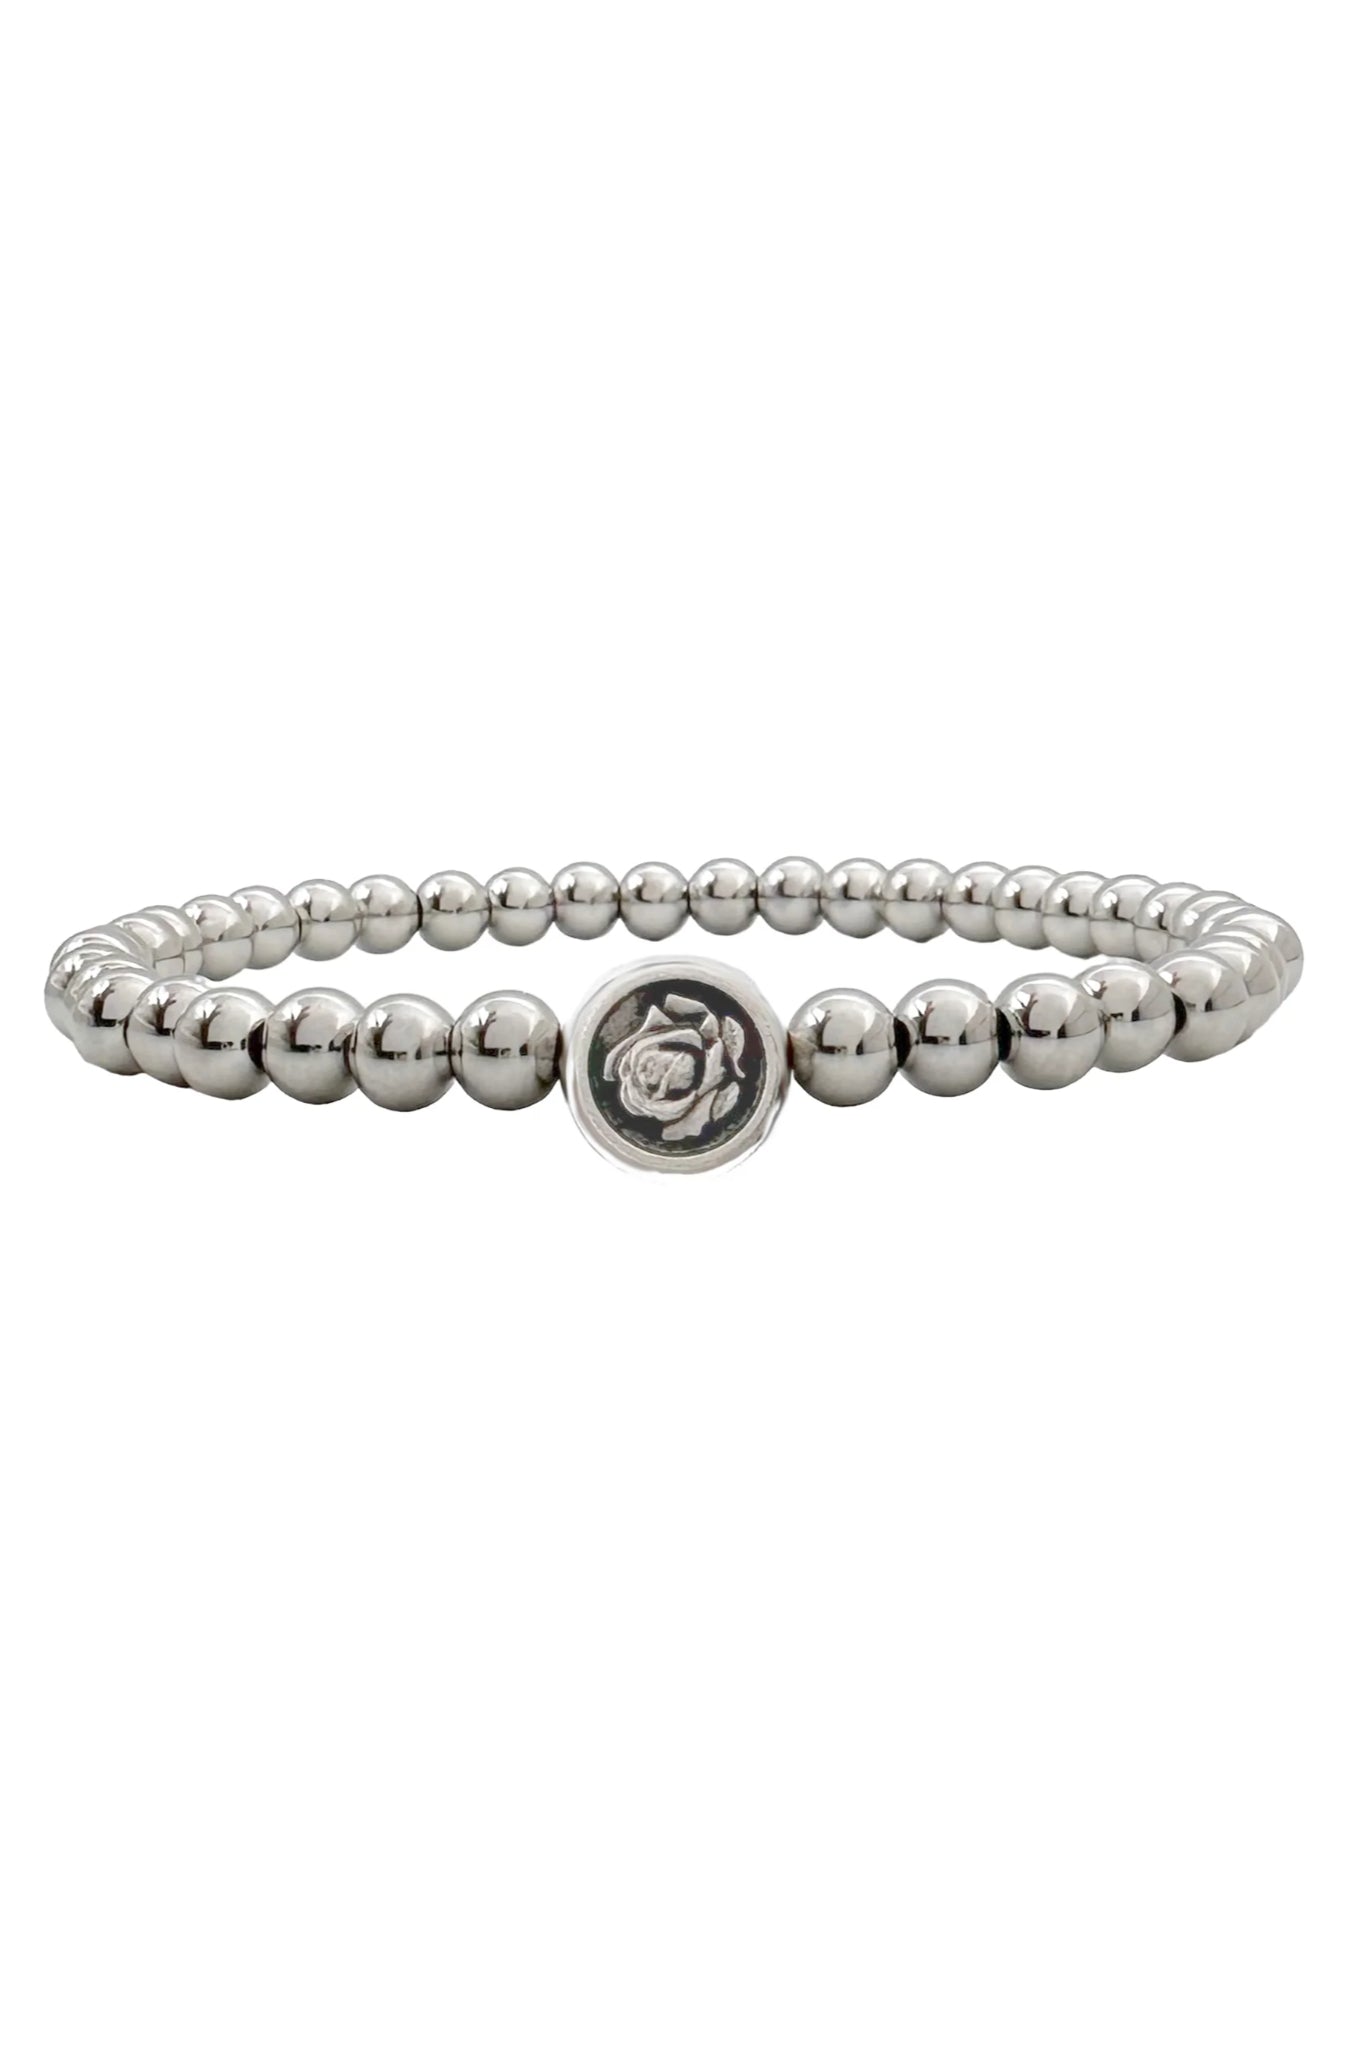 St. Therese Bracelet Silver